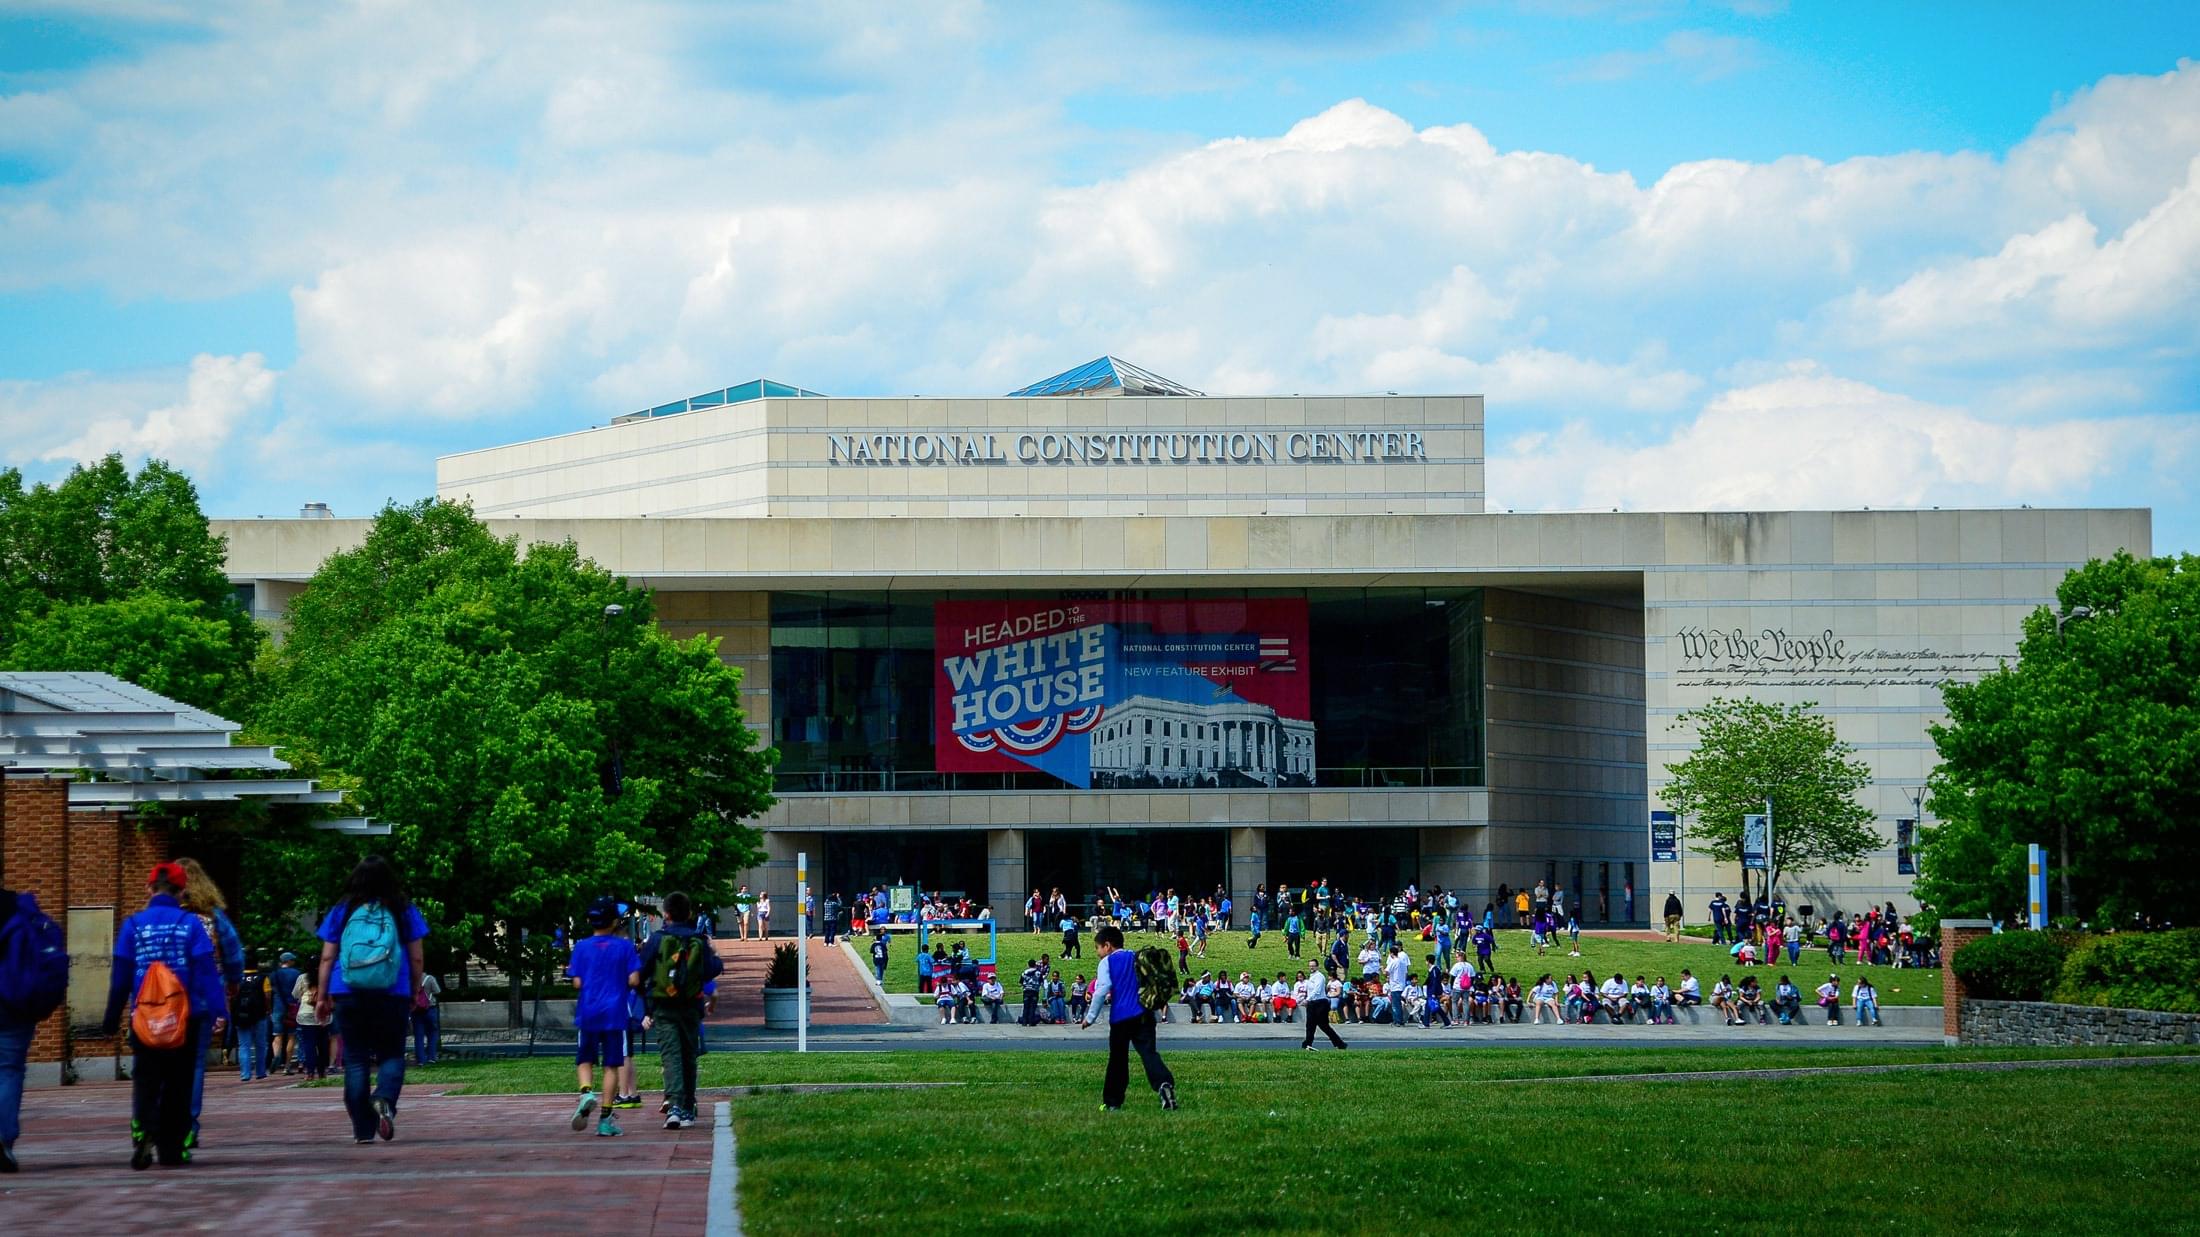 National Constitution Center Overview